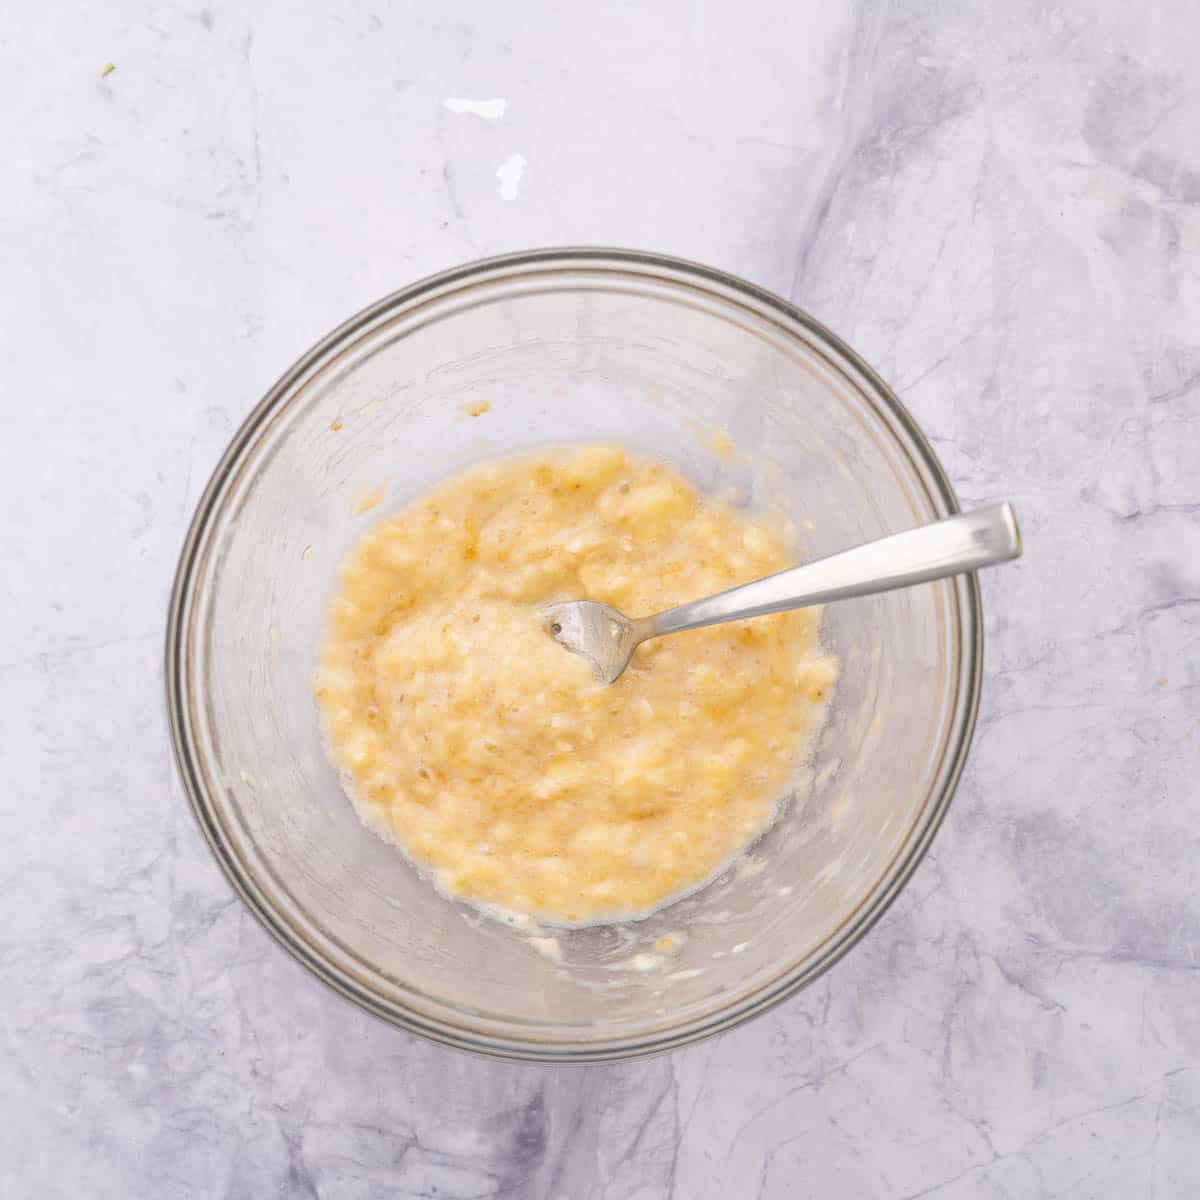 a mixing bowl of mashed banana with a fork